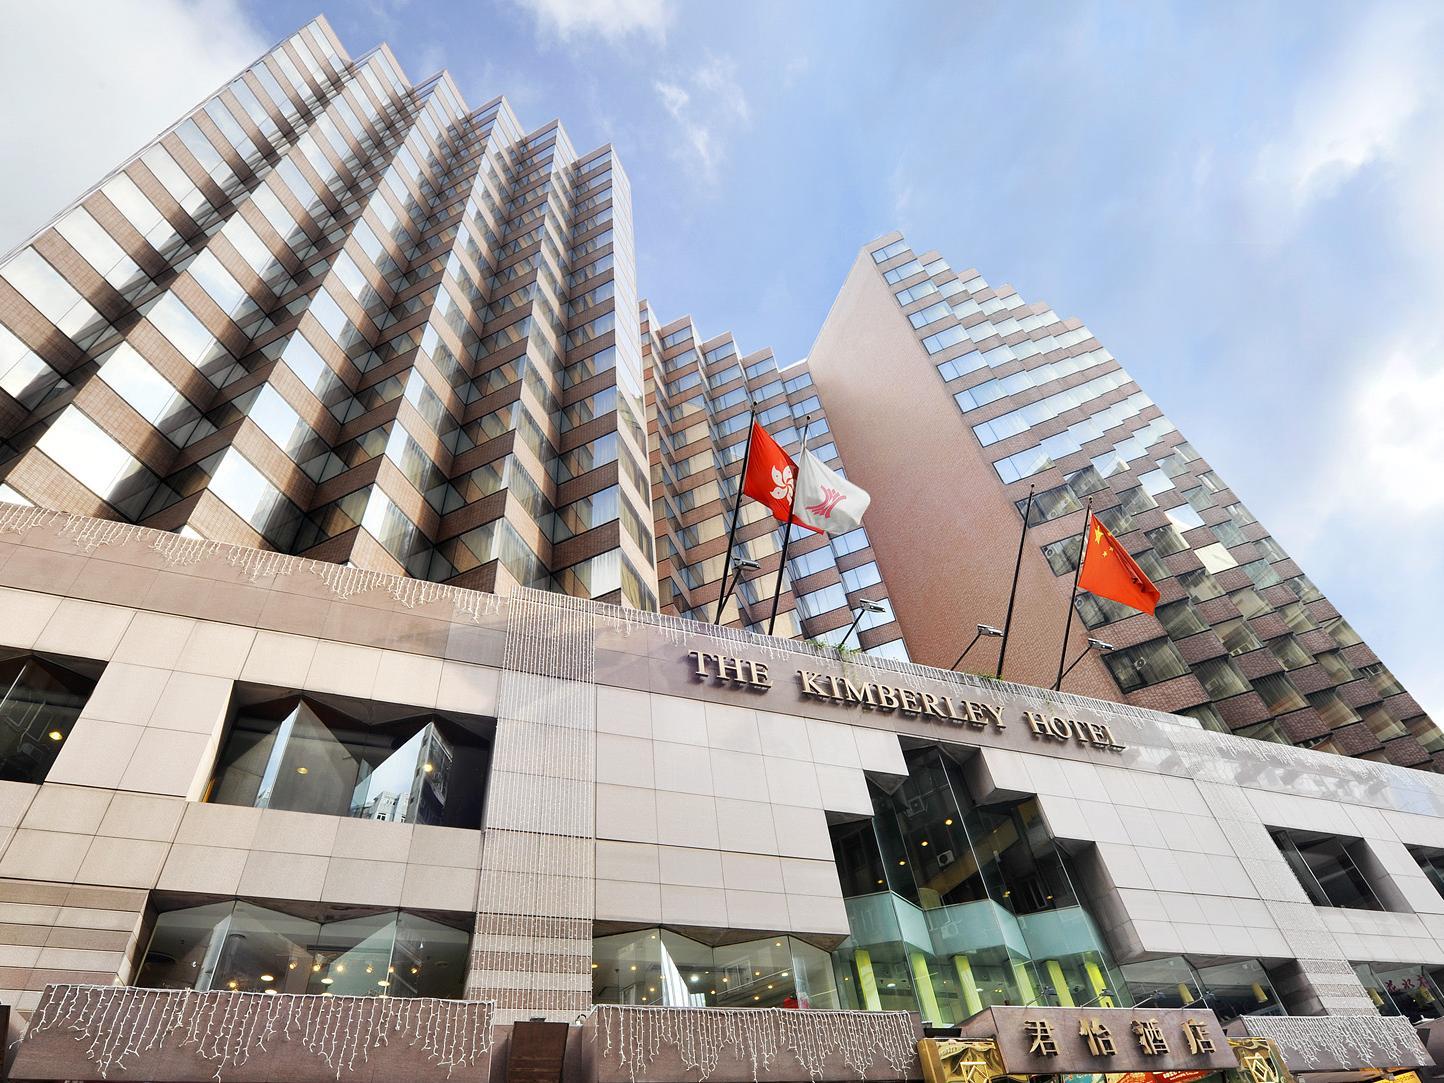 Kimberley Hotel Hong Kong FAQ 2016, What facilities are there in Kimberley Hotel Hong Kong 2016, What Languages Spoken are Supported in Kimberley Hotel Hong Kong 2016, Which payment cards are accepted in Kimberley Hotel Hong Kong , Hong Kong Kimberley Hotel room facilities and services Q&A 2016, Hong Kong Kimberley Hotel online booking services 2016, Hong Kong Kimberley Hotel address 2016, Hong Kong Kimberley Hotel telephone number 2016,Hong Kong Kimberley Hotel map 2016, Hong Kong Kimberley Hotel traffic guide 2016, how to go Hong Kong Kimberley Hotel, Hong Kong Kimberley Hotel booking online 2016, Hong Kong Kimberley Hotel room types 2016.